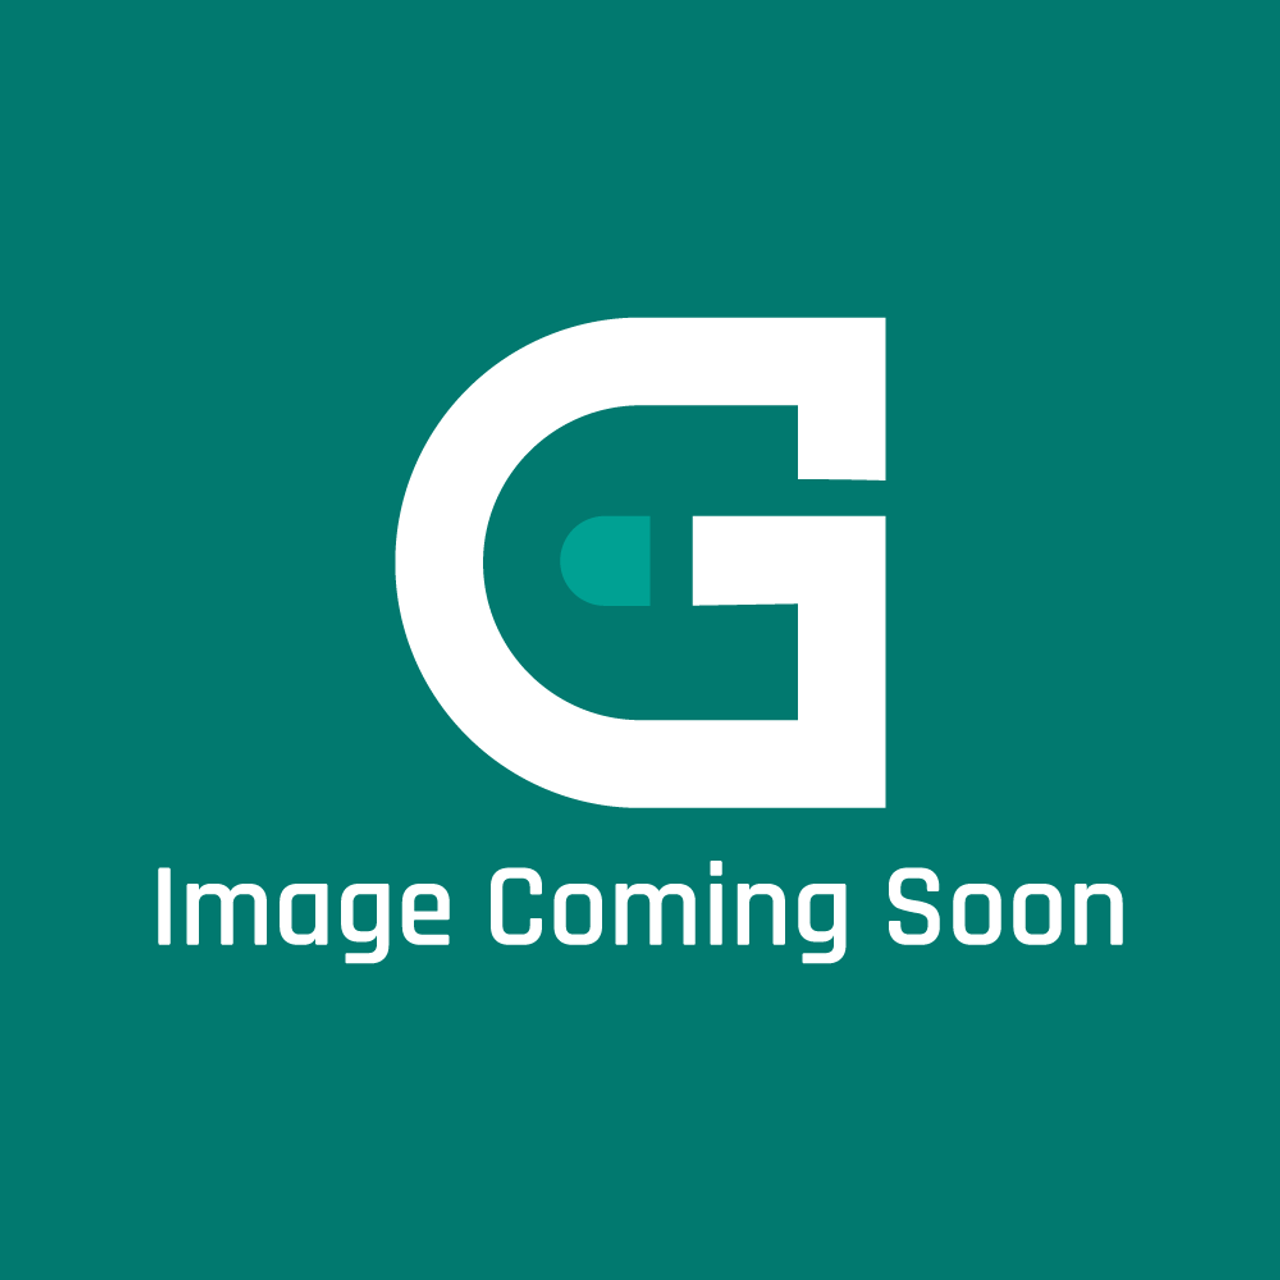 GE Appliances WB15X277 - KIT-HANDLE - Image Coming Soon!